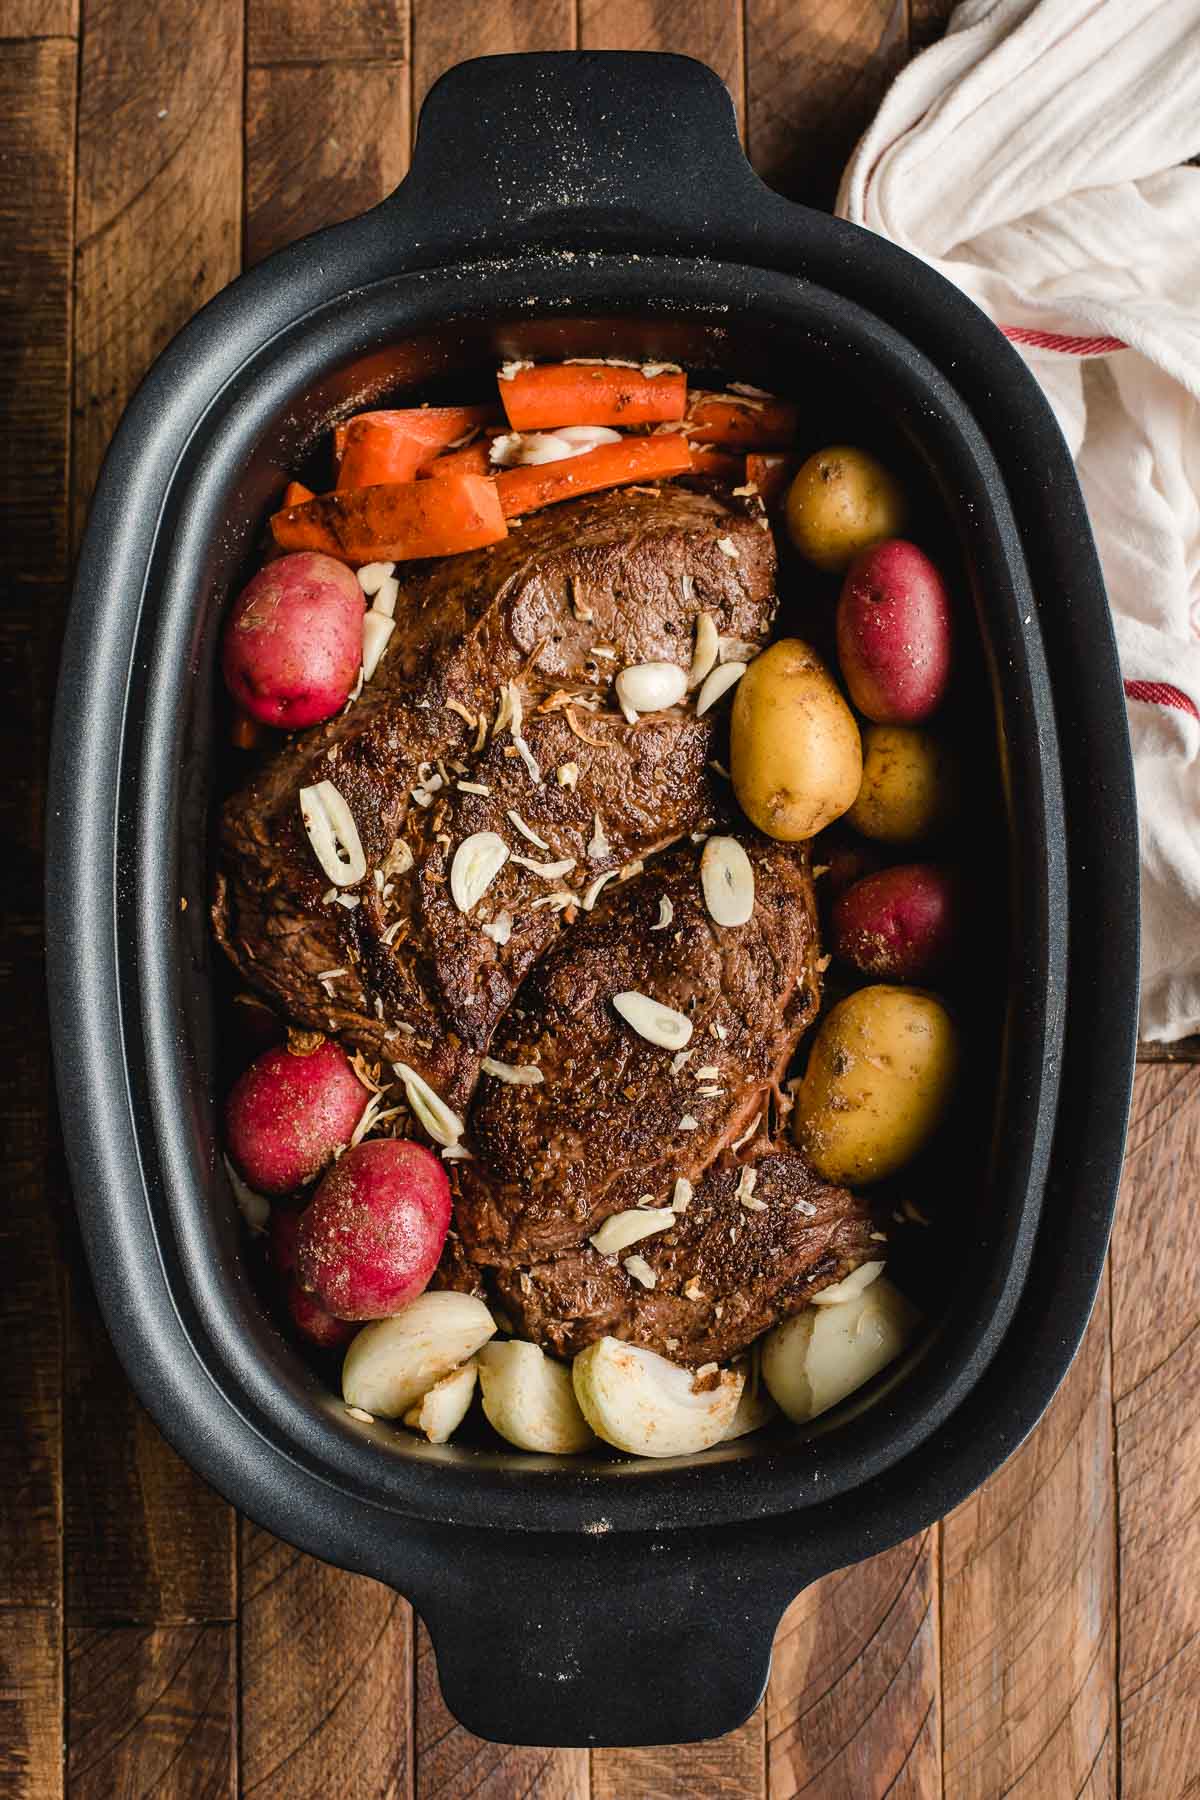 Crock Pot filled with browned pot roast, potatoes, onions, carrots, and garlic.